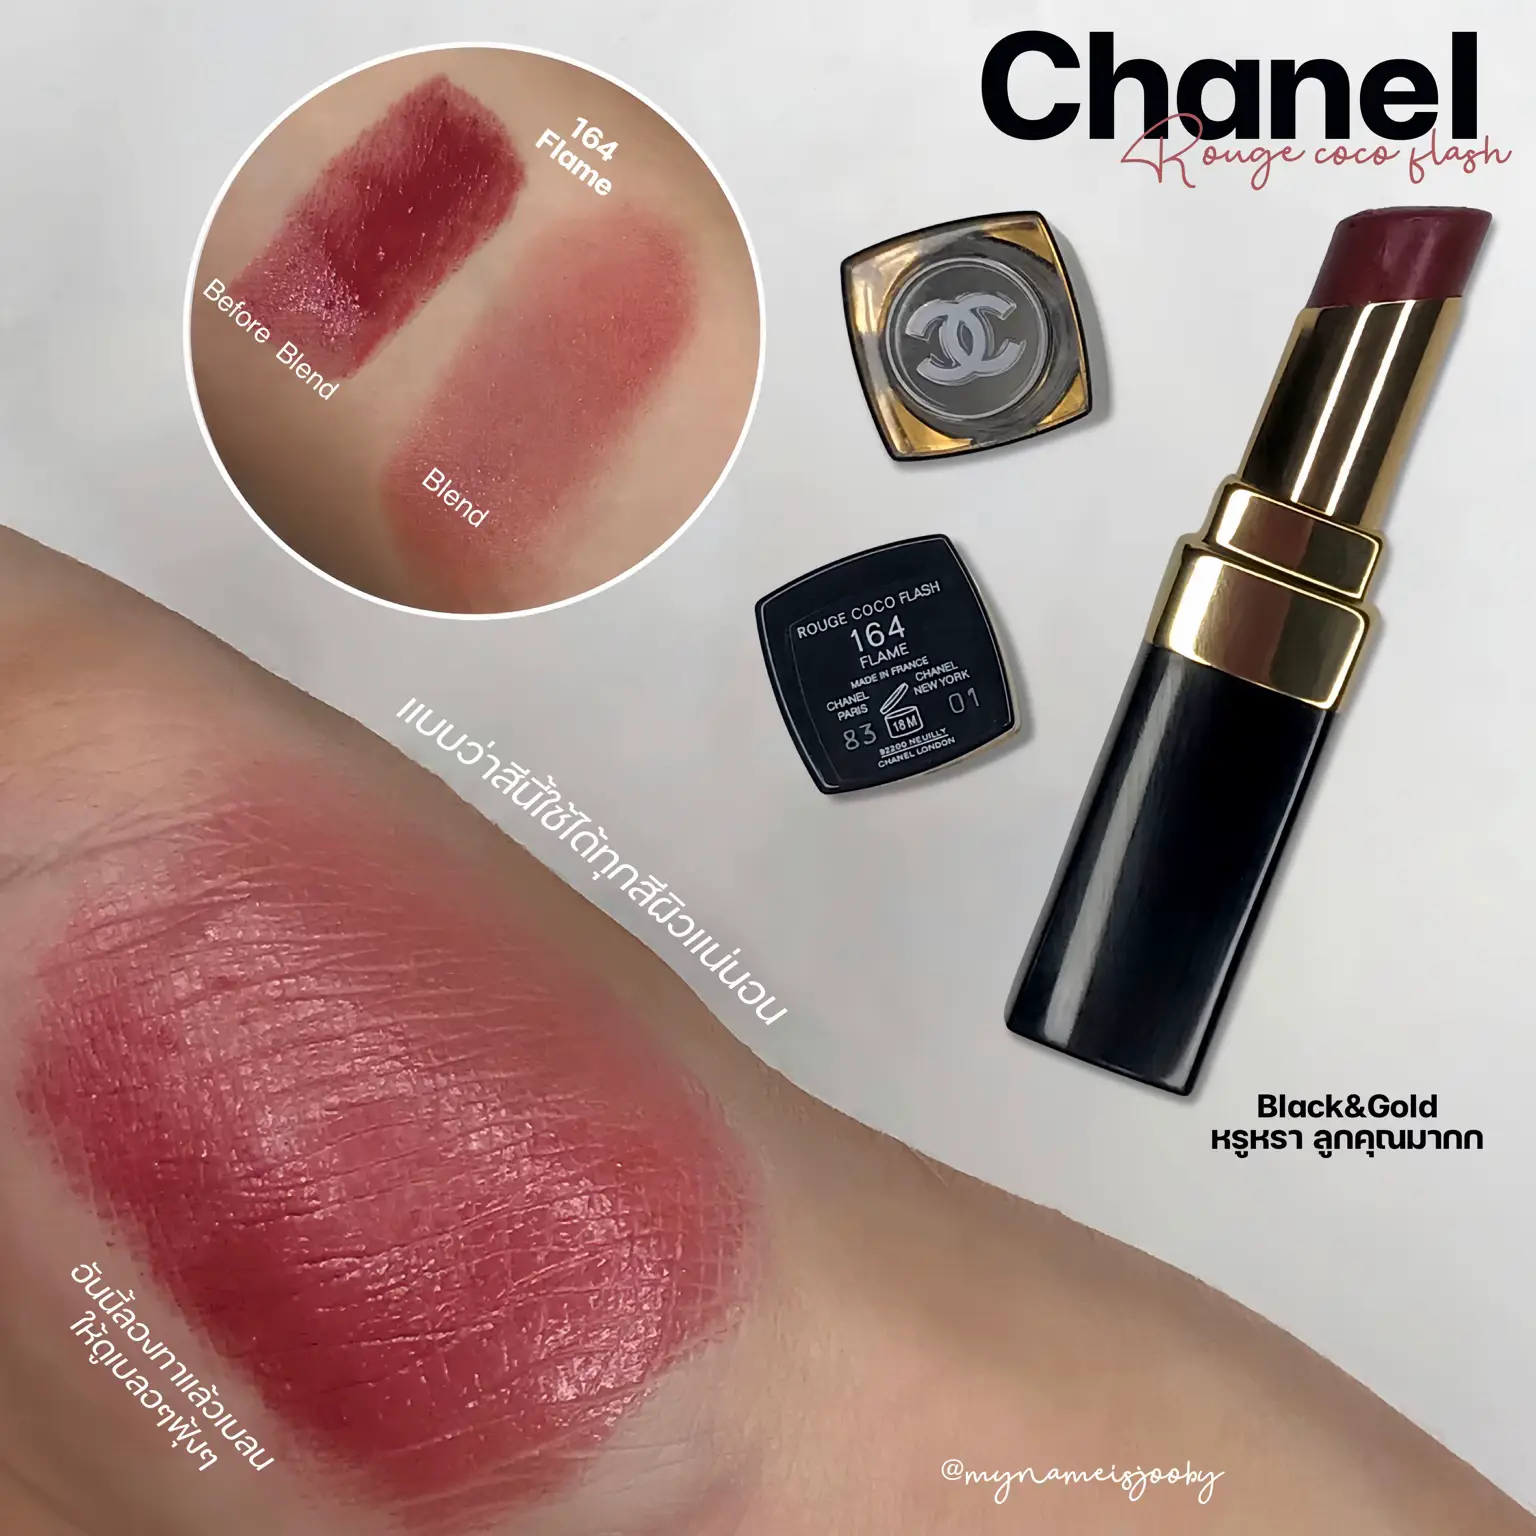 Chanel ลิปลูกคุณ 💄💫, Gallery posted by mynameisjooby